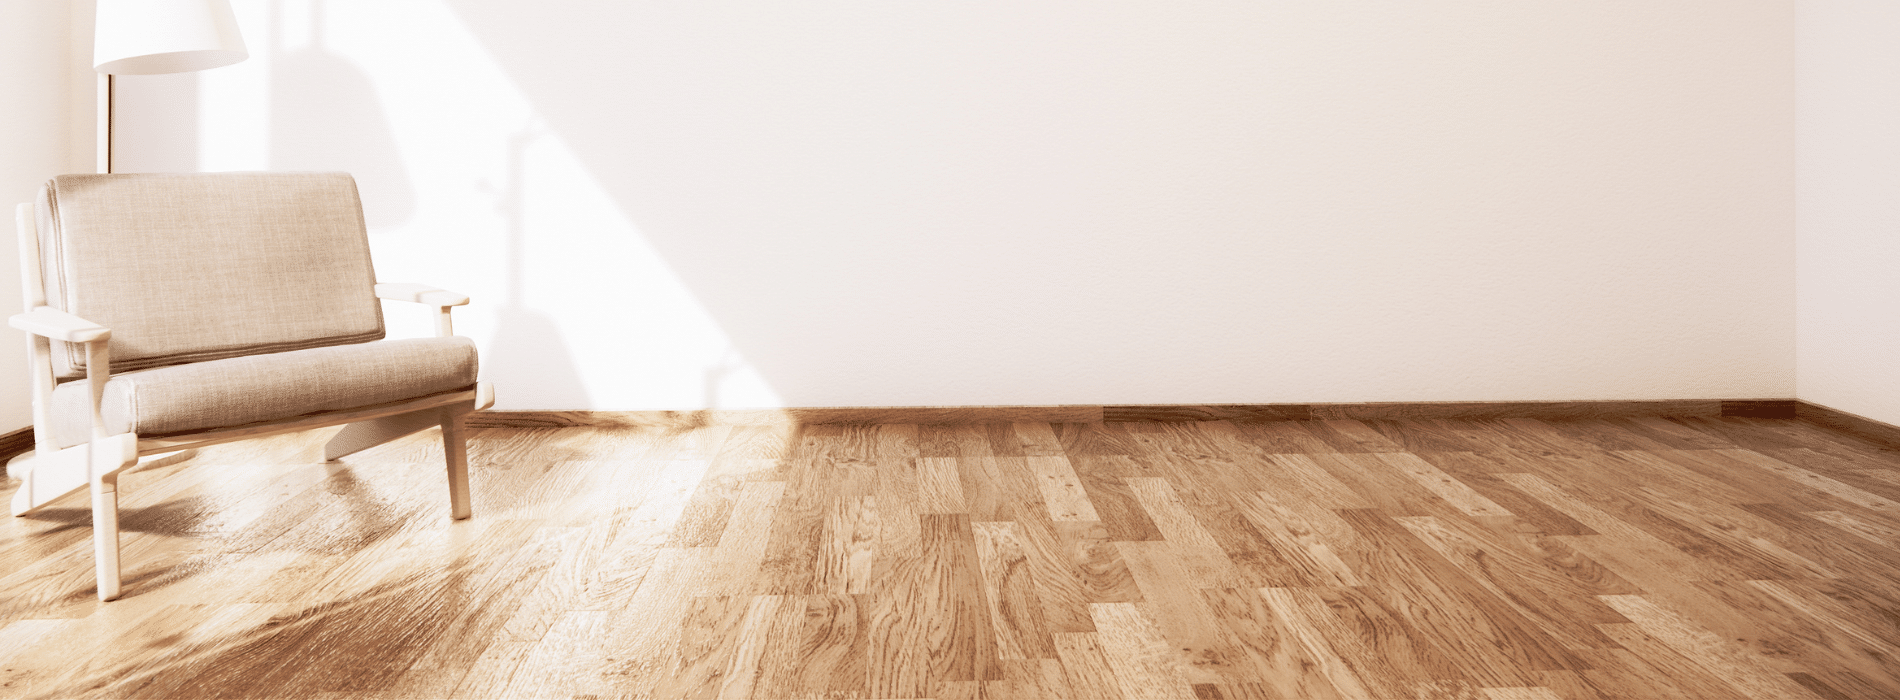 Mr Sander® in Beddington, SM6 have accomplished a remarkable feat by skillfully restoring five-year-old engineered oak floors. With meticulous care, they have revived the floors' natural beauty to perfection. 